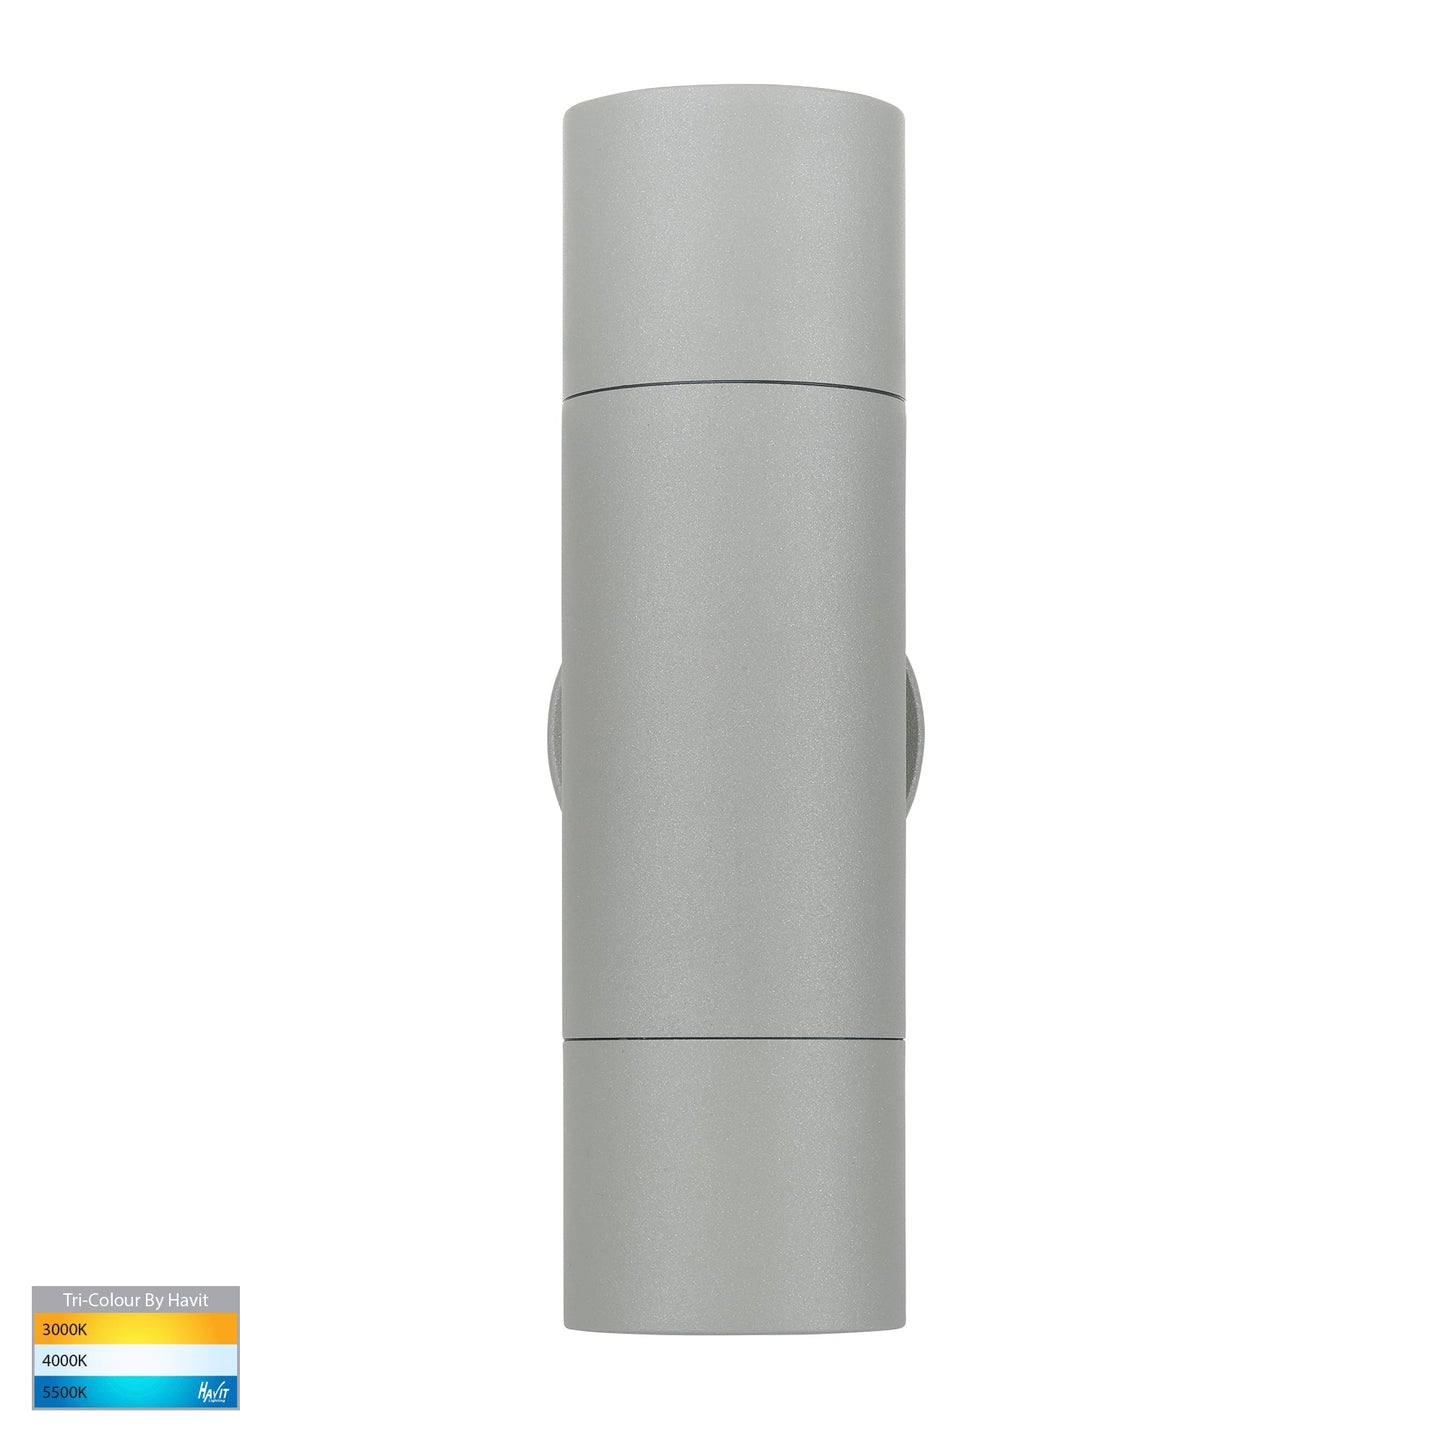 Hv1045t-Hv1047t - Tivah Silver Tri Colour Up and Down Wall Pillar Lights